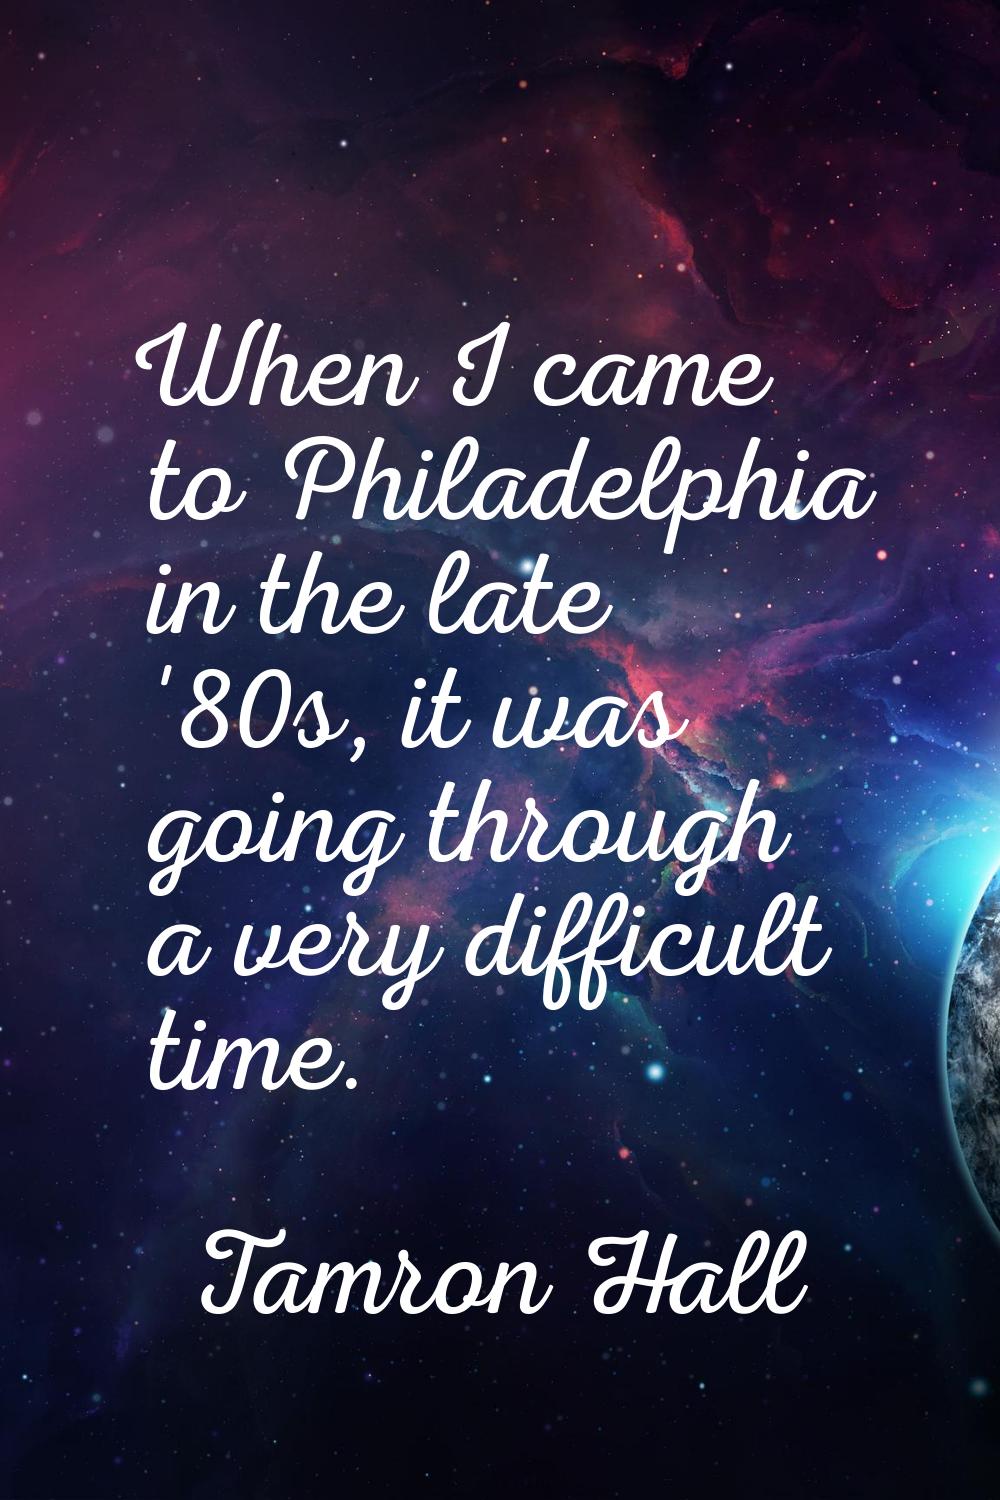 When I came to Philadelphia in the late '80s, it was going through a very difficult time.